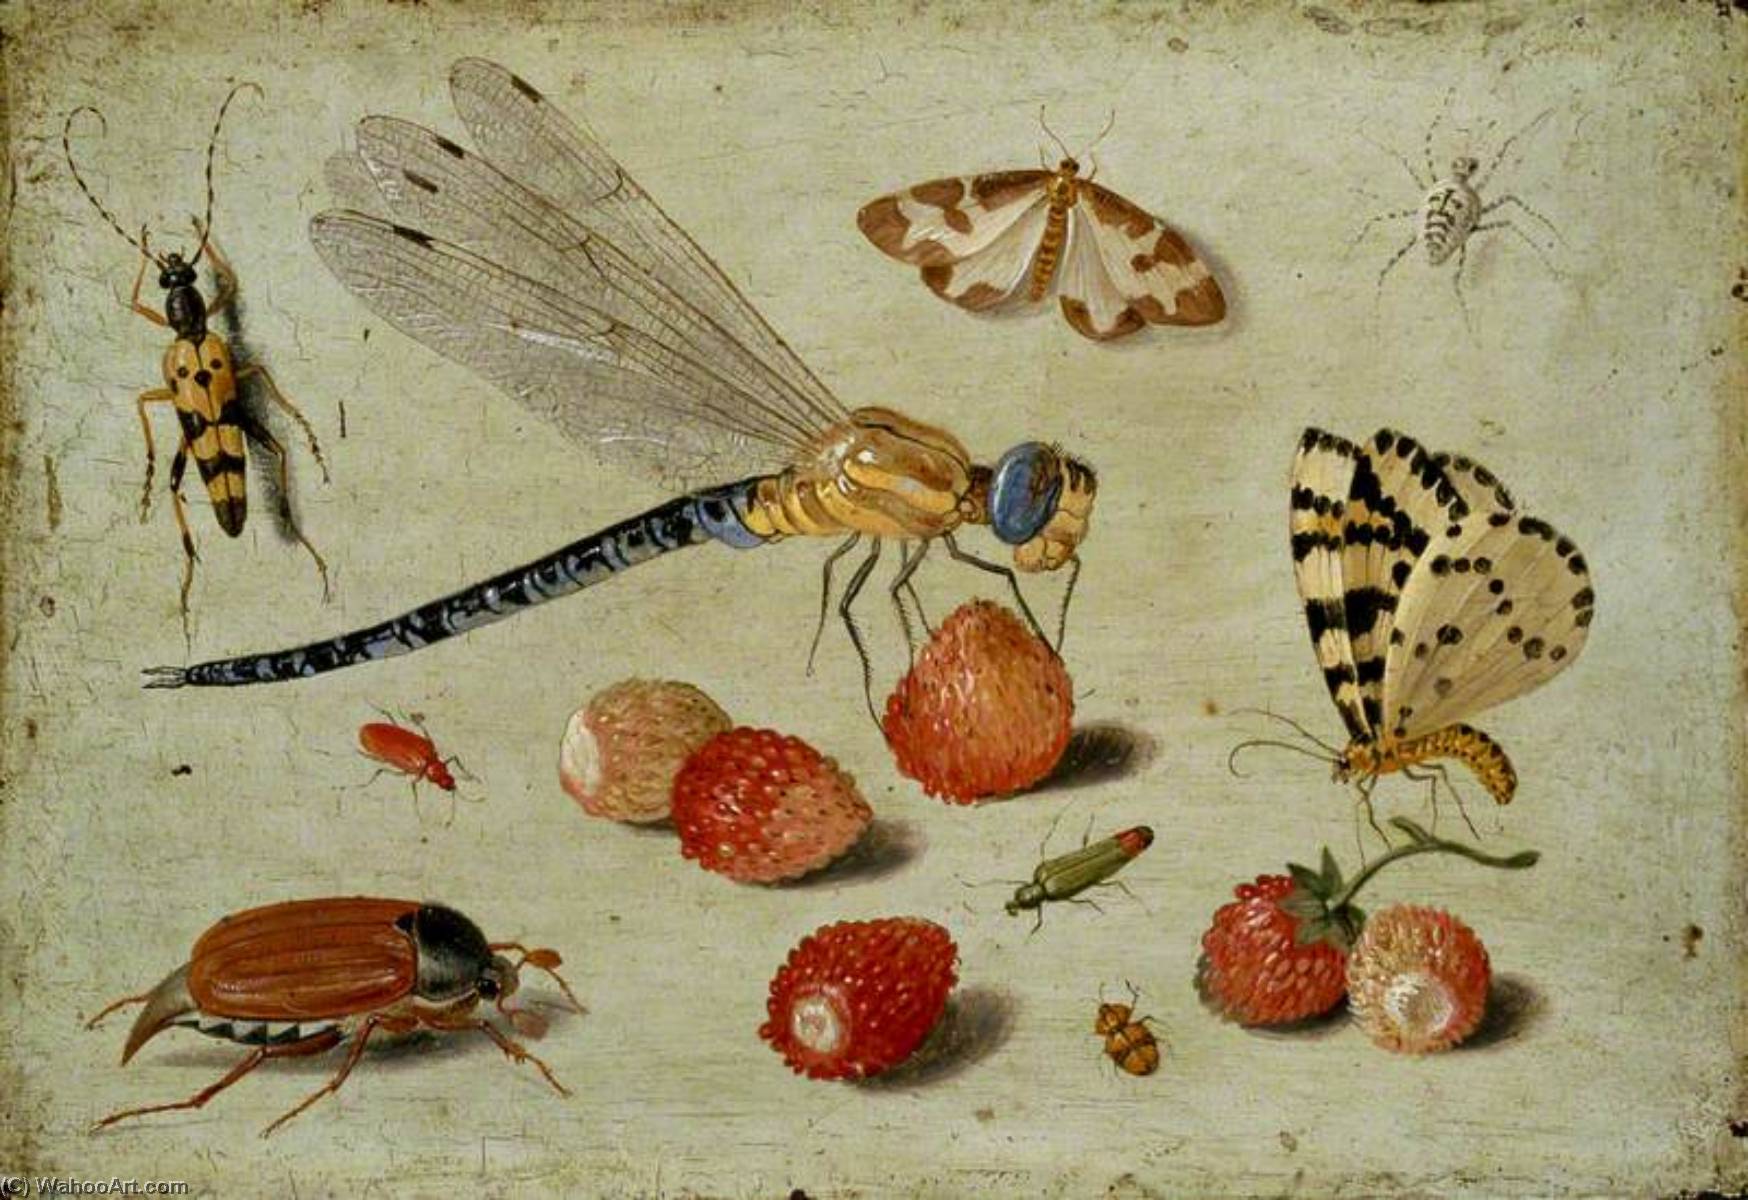 WikiOO.org - Encyclopedia of Fine Arts - Maleri, Artwork Jan Van Kessel The Elder - A Dragon fly, two Moths, a Spider and some Beetles, with wild Strawberries